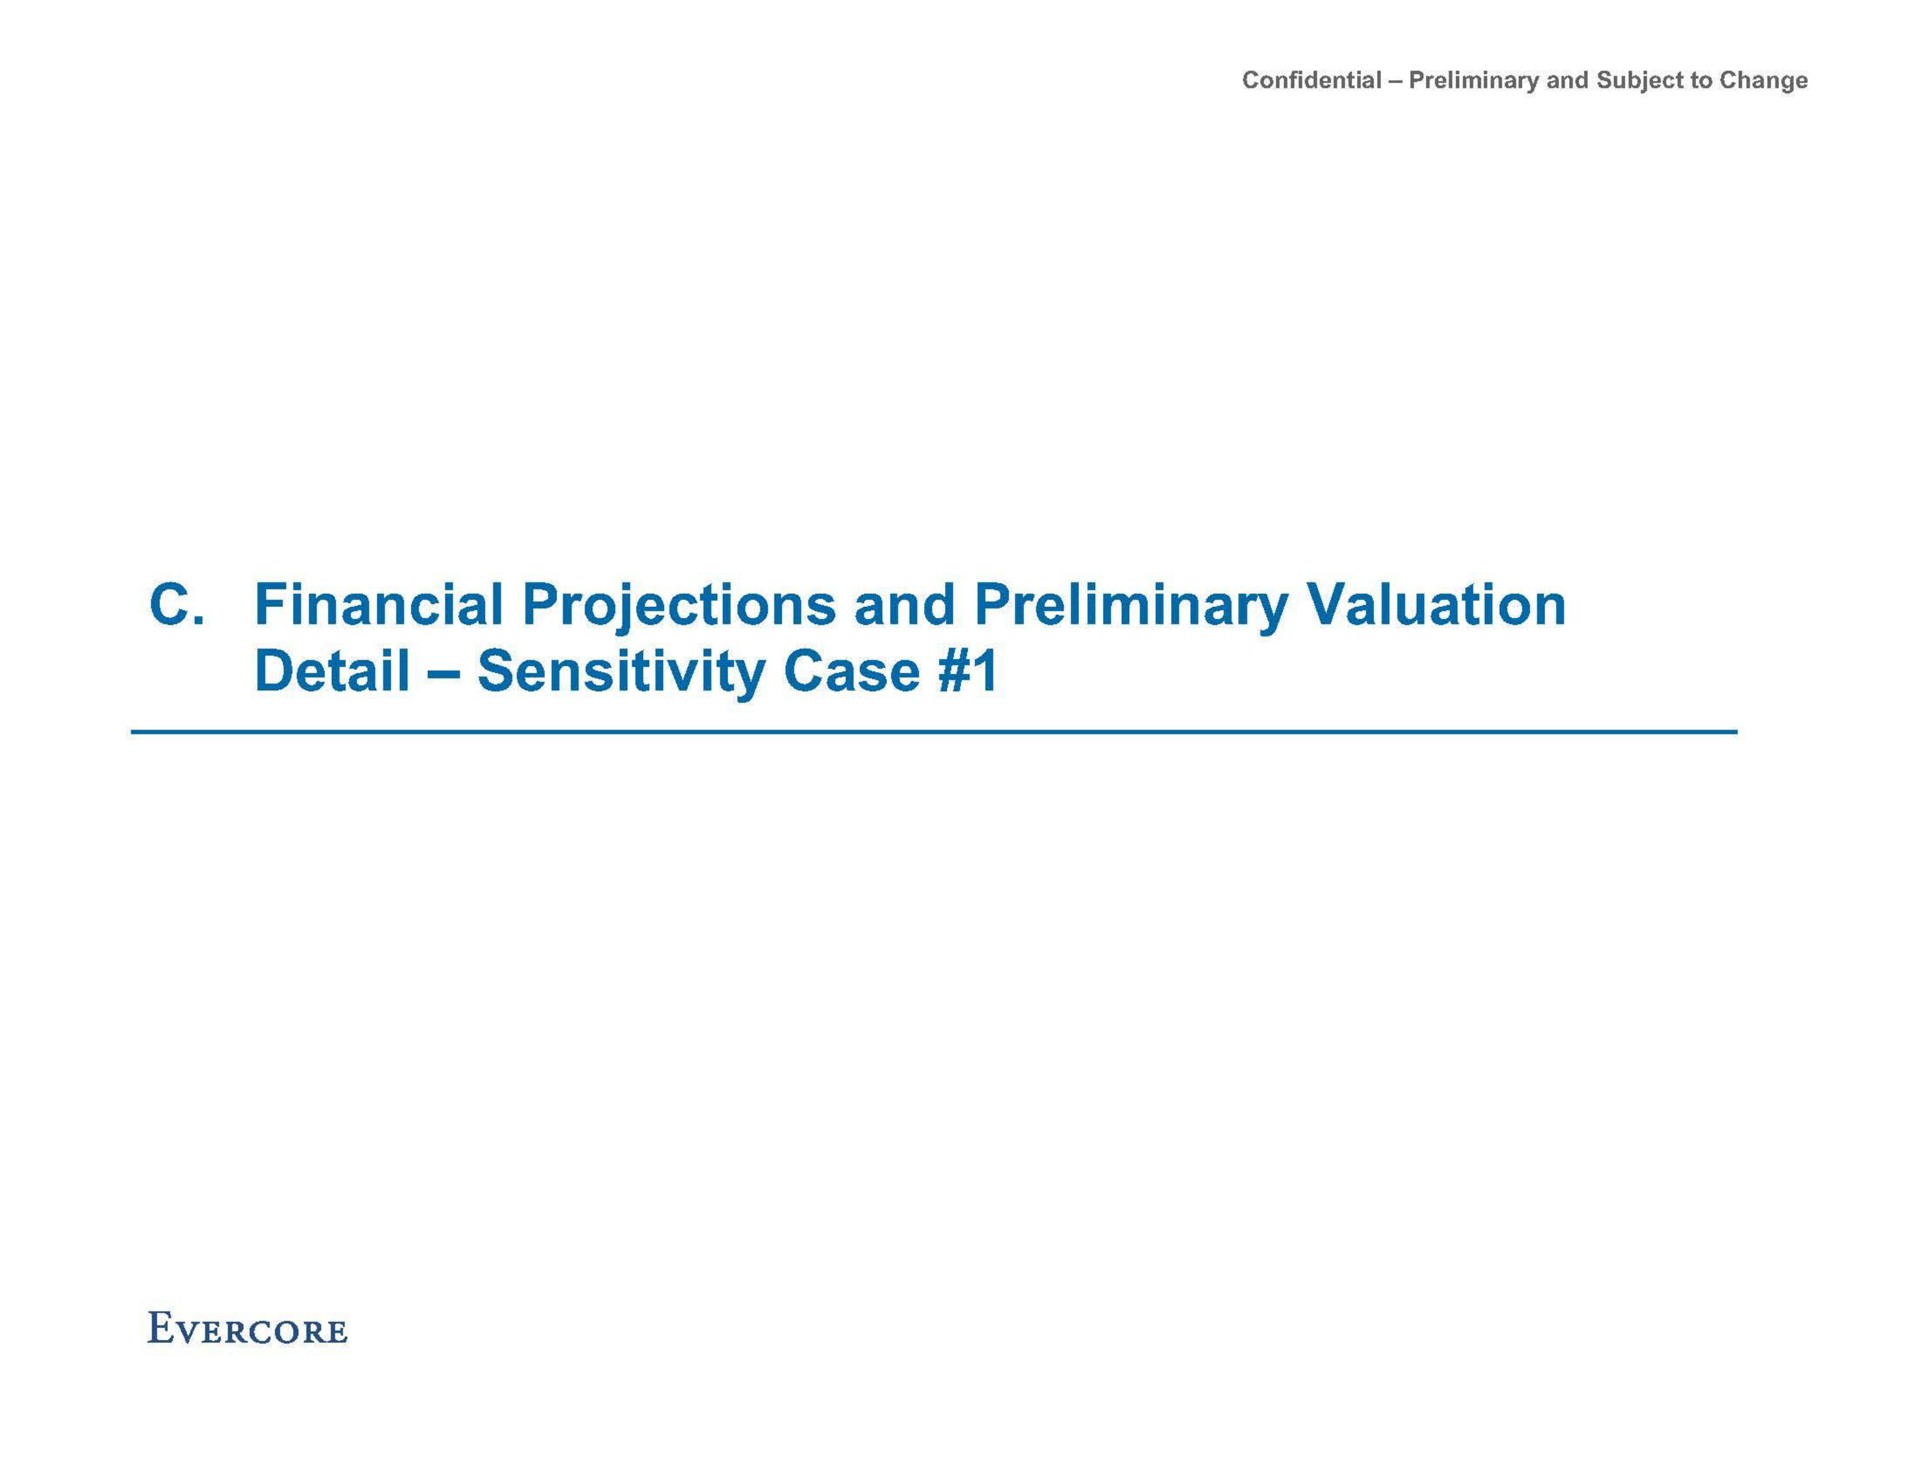 financial projections and preliminary valuation detail sensitivity case | Evercore